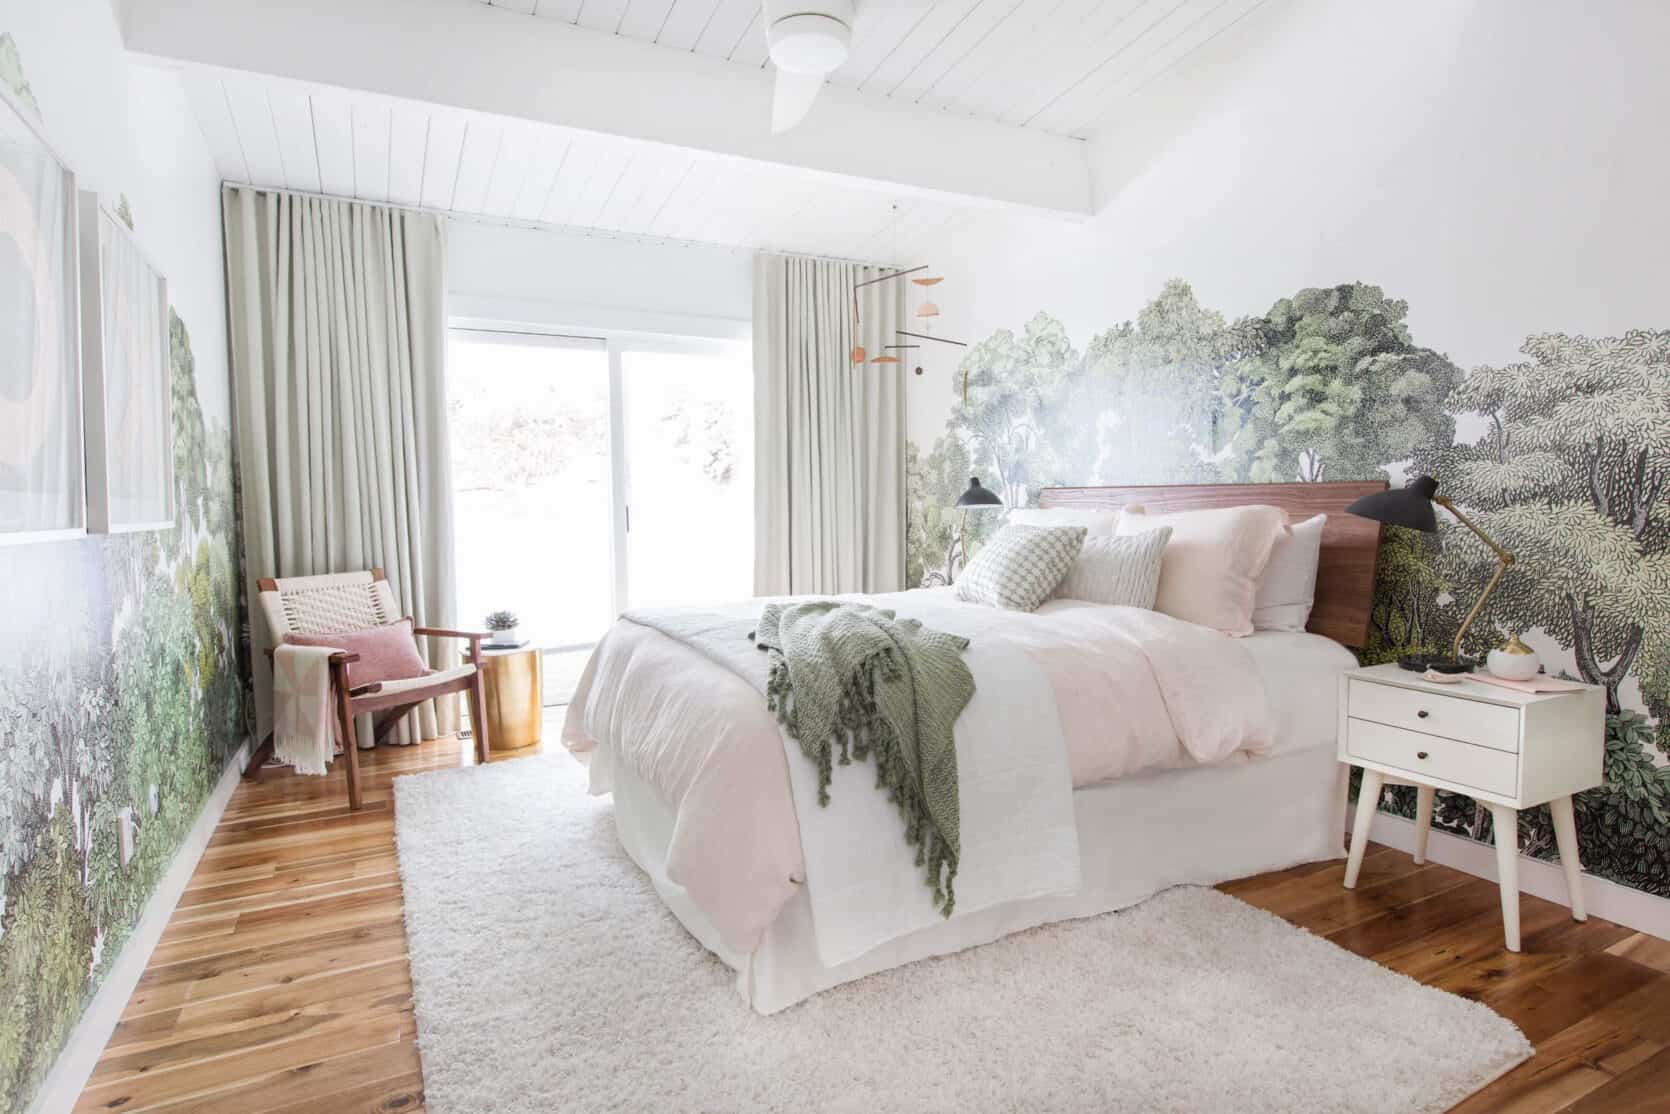 Design 101: Let'S Talk About Throw Blankets And How To Style Them + Shop Our Favorites